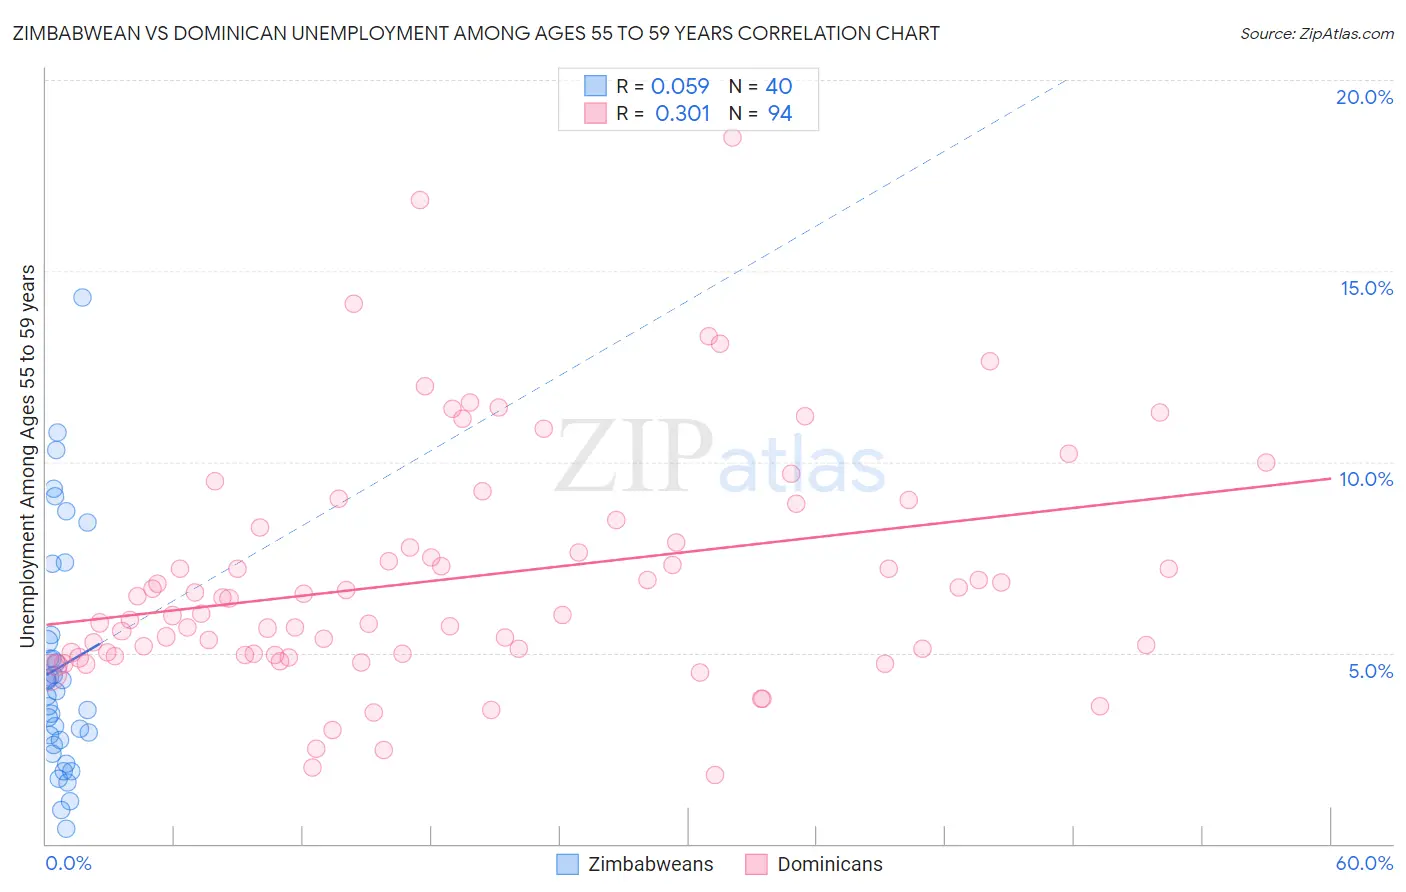 Zimbabwean vs Dominican Unemployment Among Ages 55 to 59 years